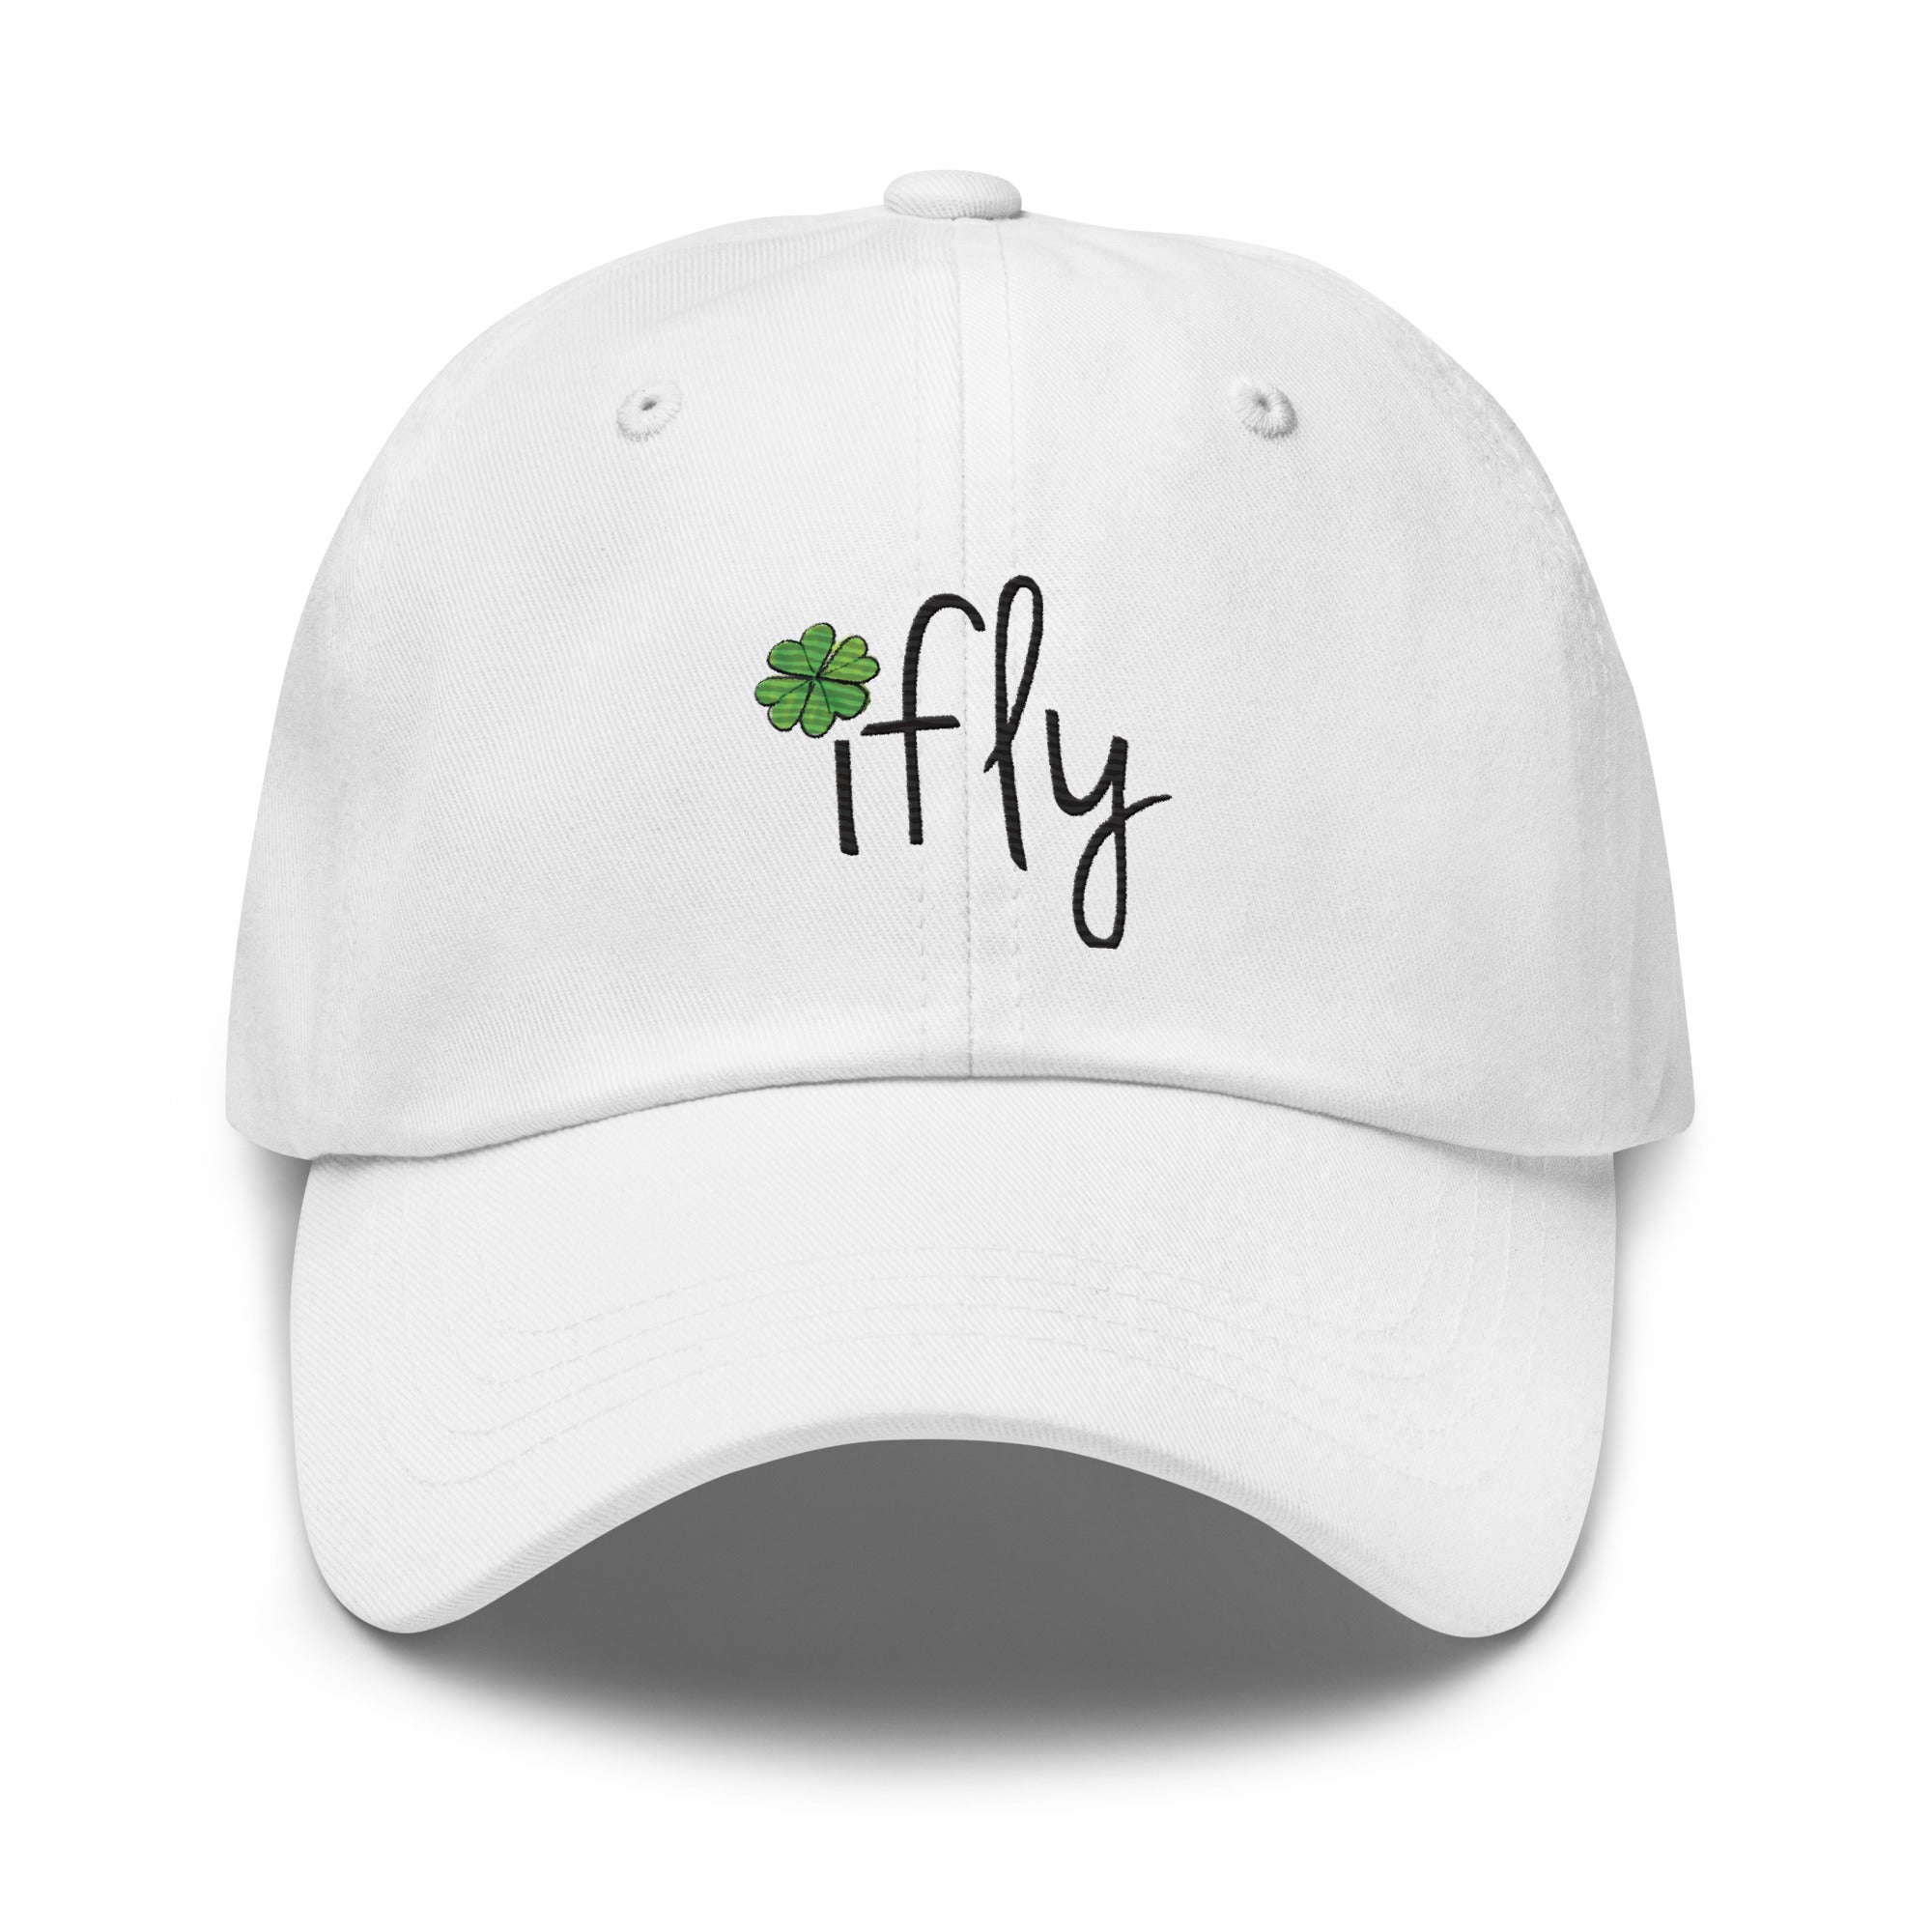 Ifly Hat